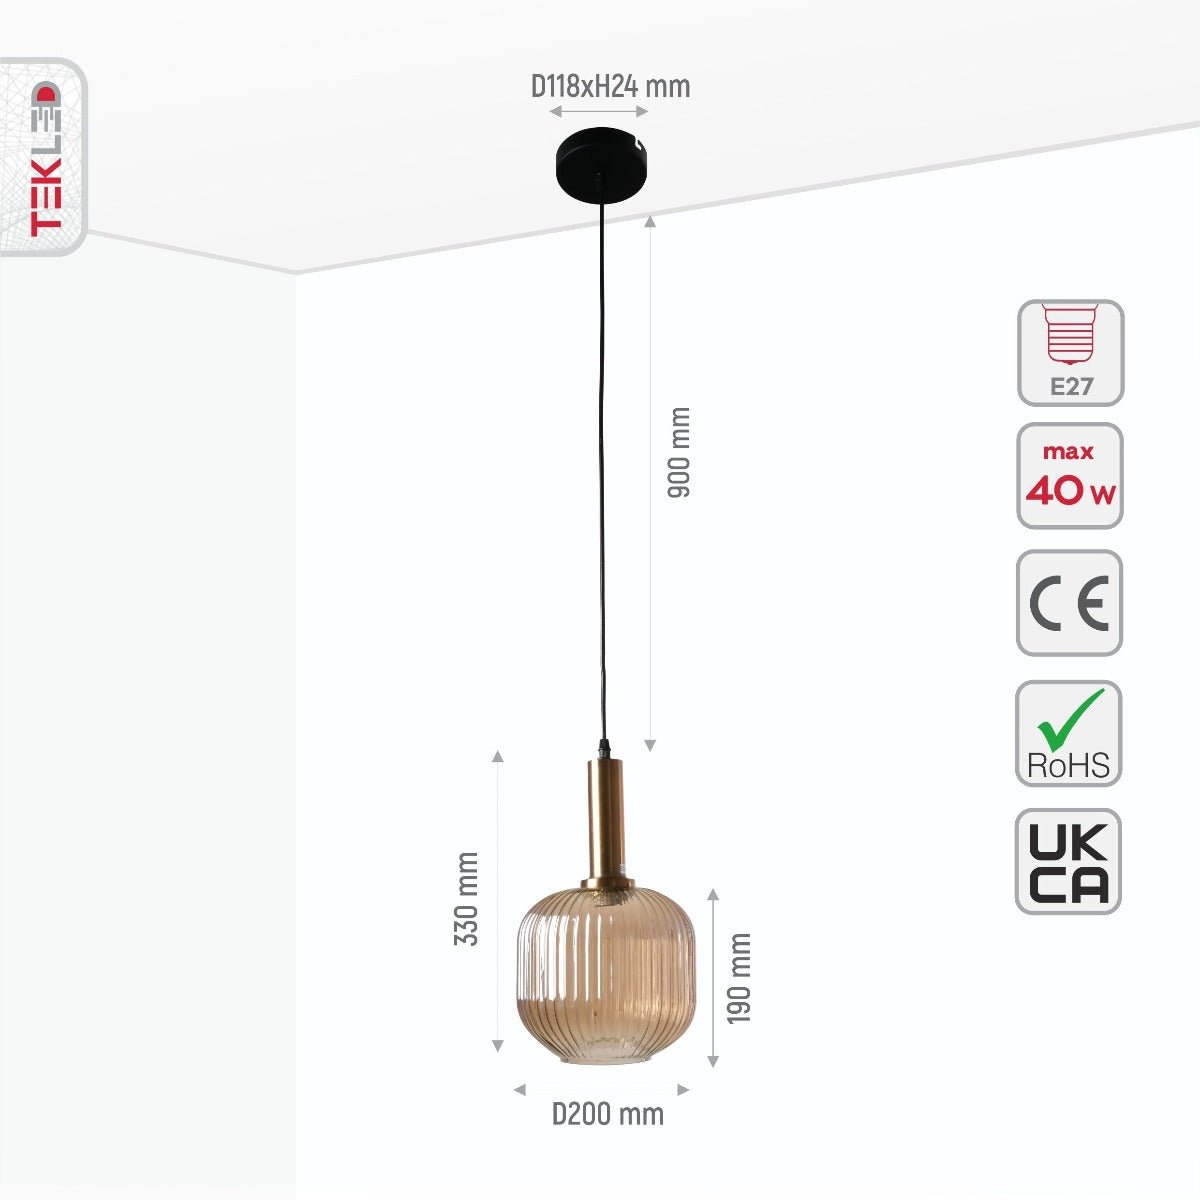 Size and specs of Amber Glass M Pendant Light with E27 Fitting | TEKLED 158-19602